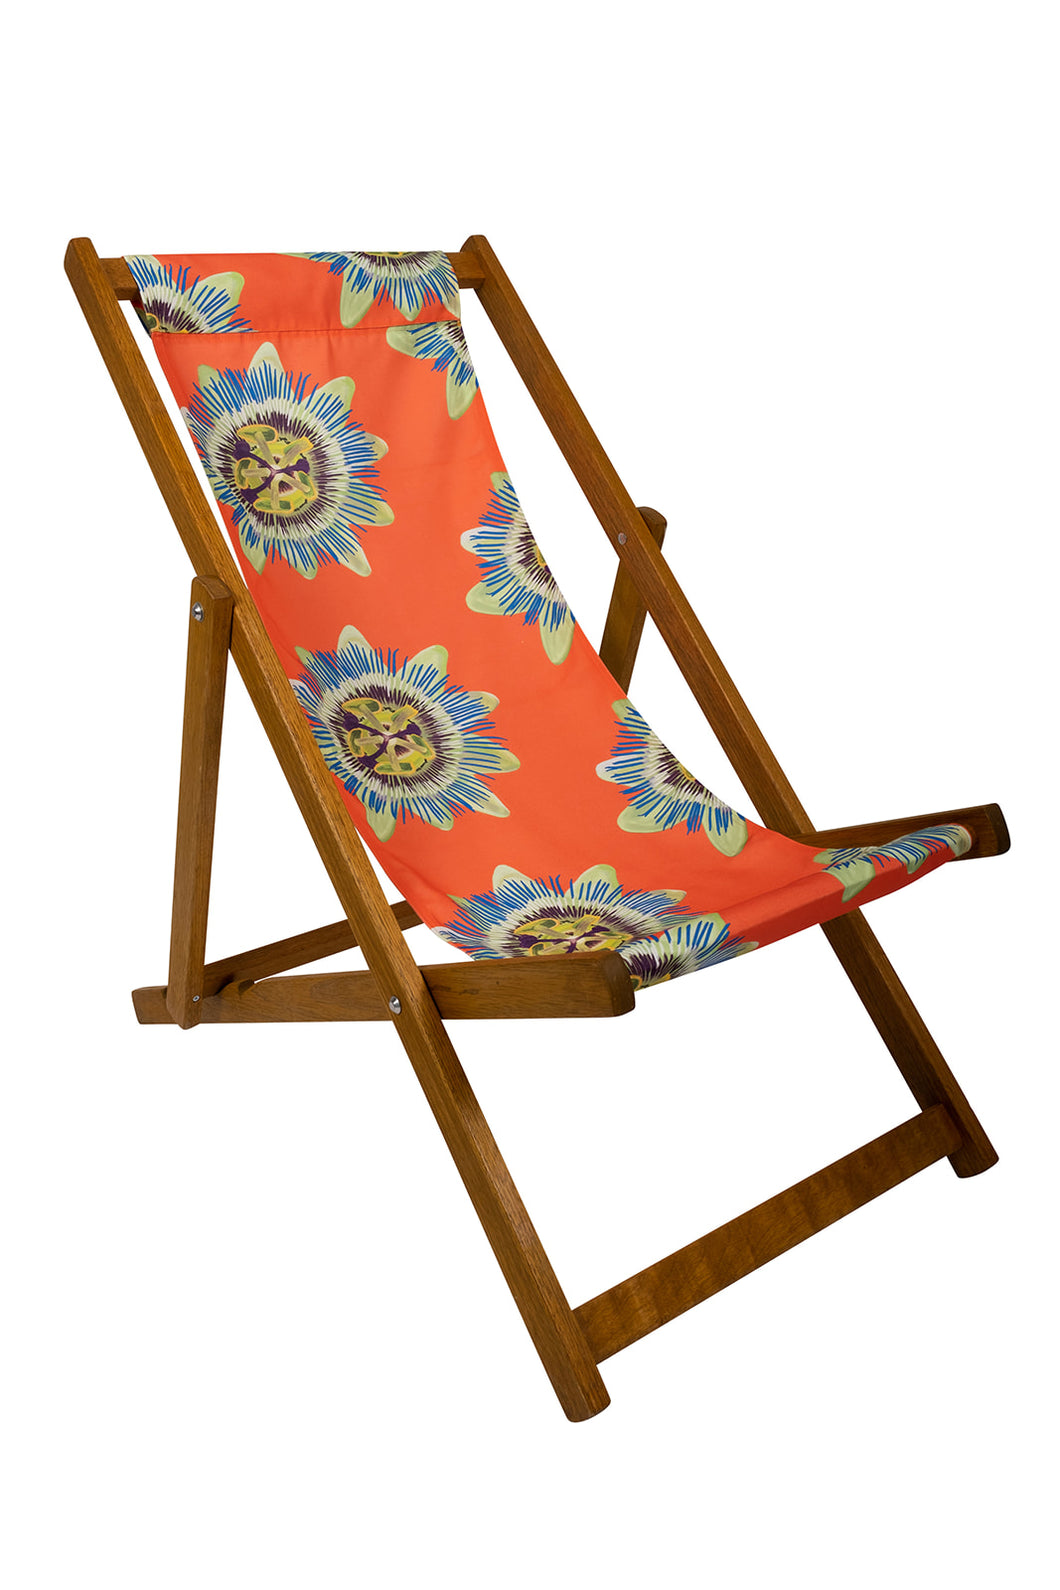 Coral Passion Flower Deck Chair